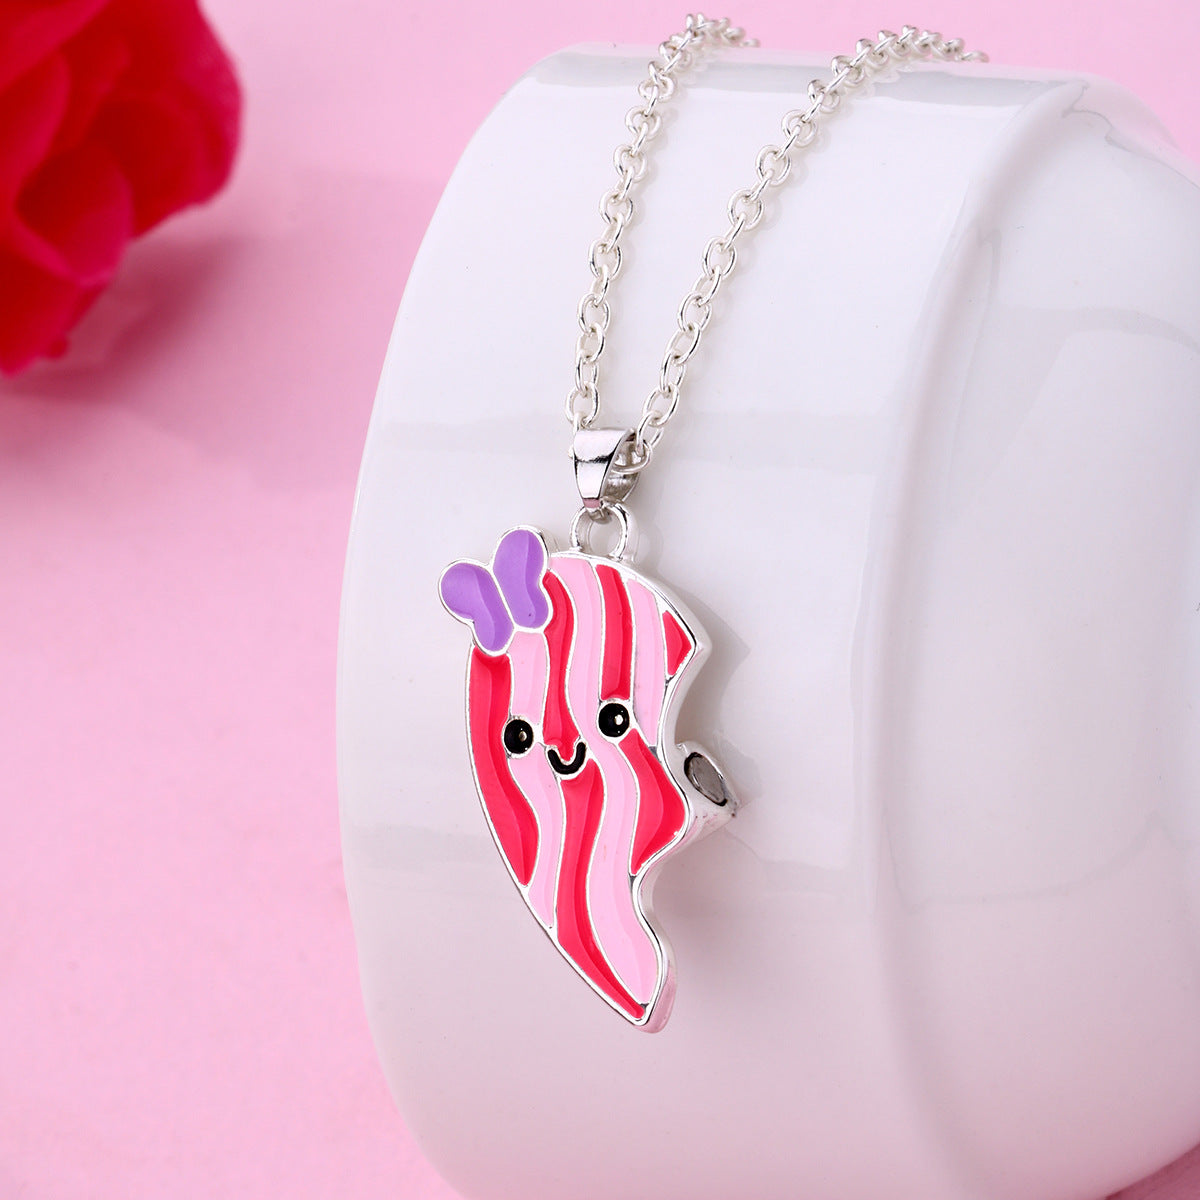 Fun, modern best friend necklaces that go beyond the heart split in two.